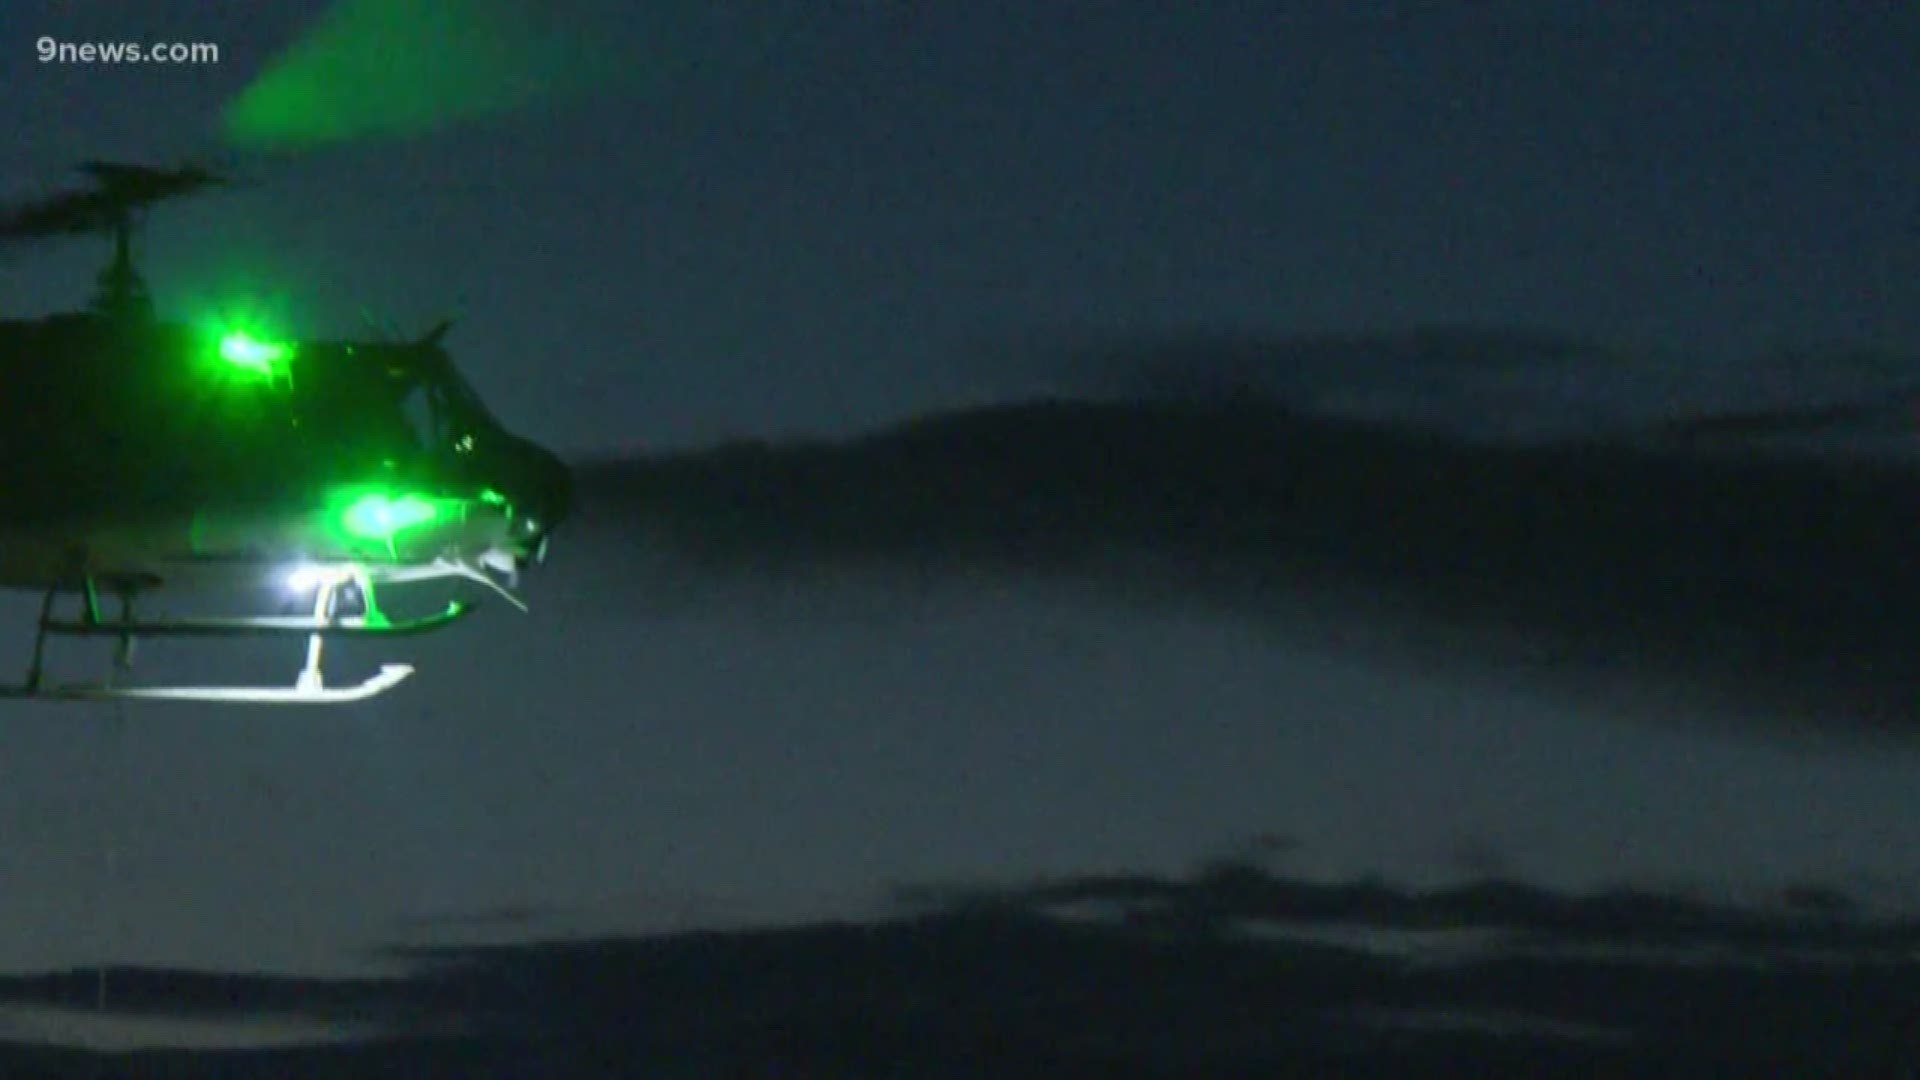 Colorado is the first state in the nation to allow helicopters fighting fires to fly after dark.